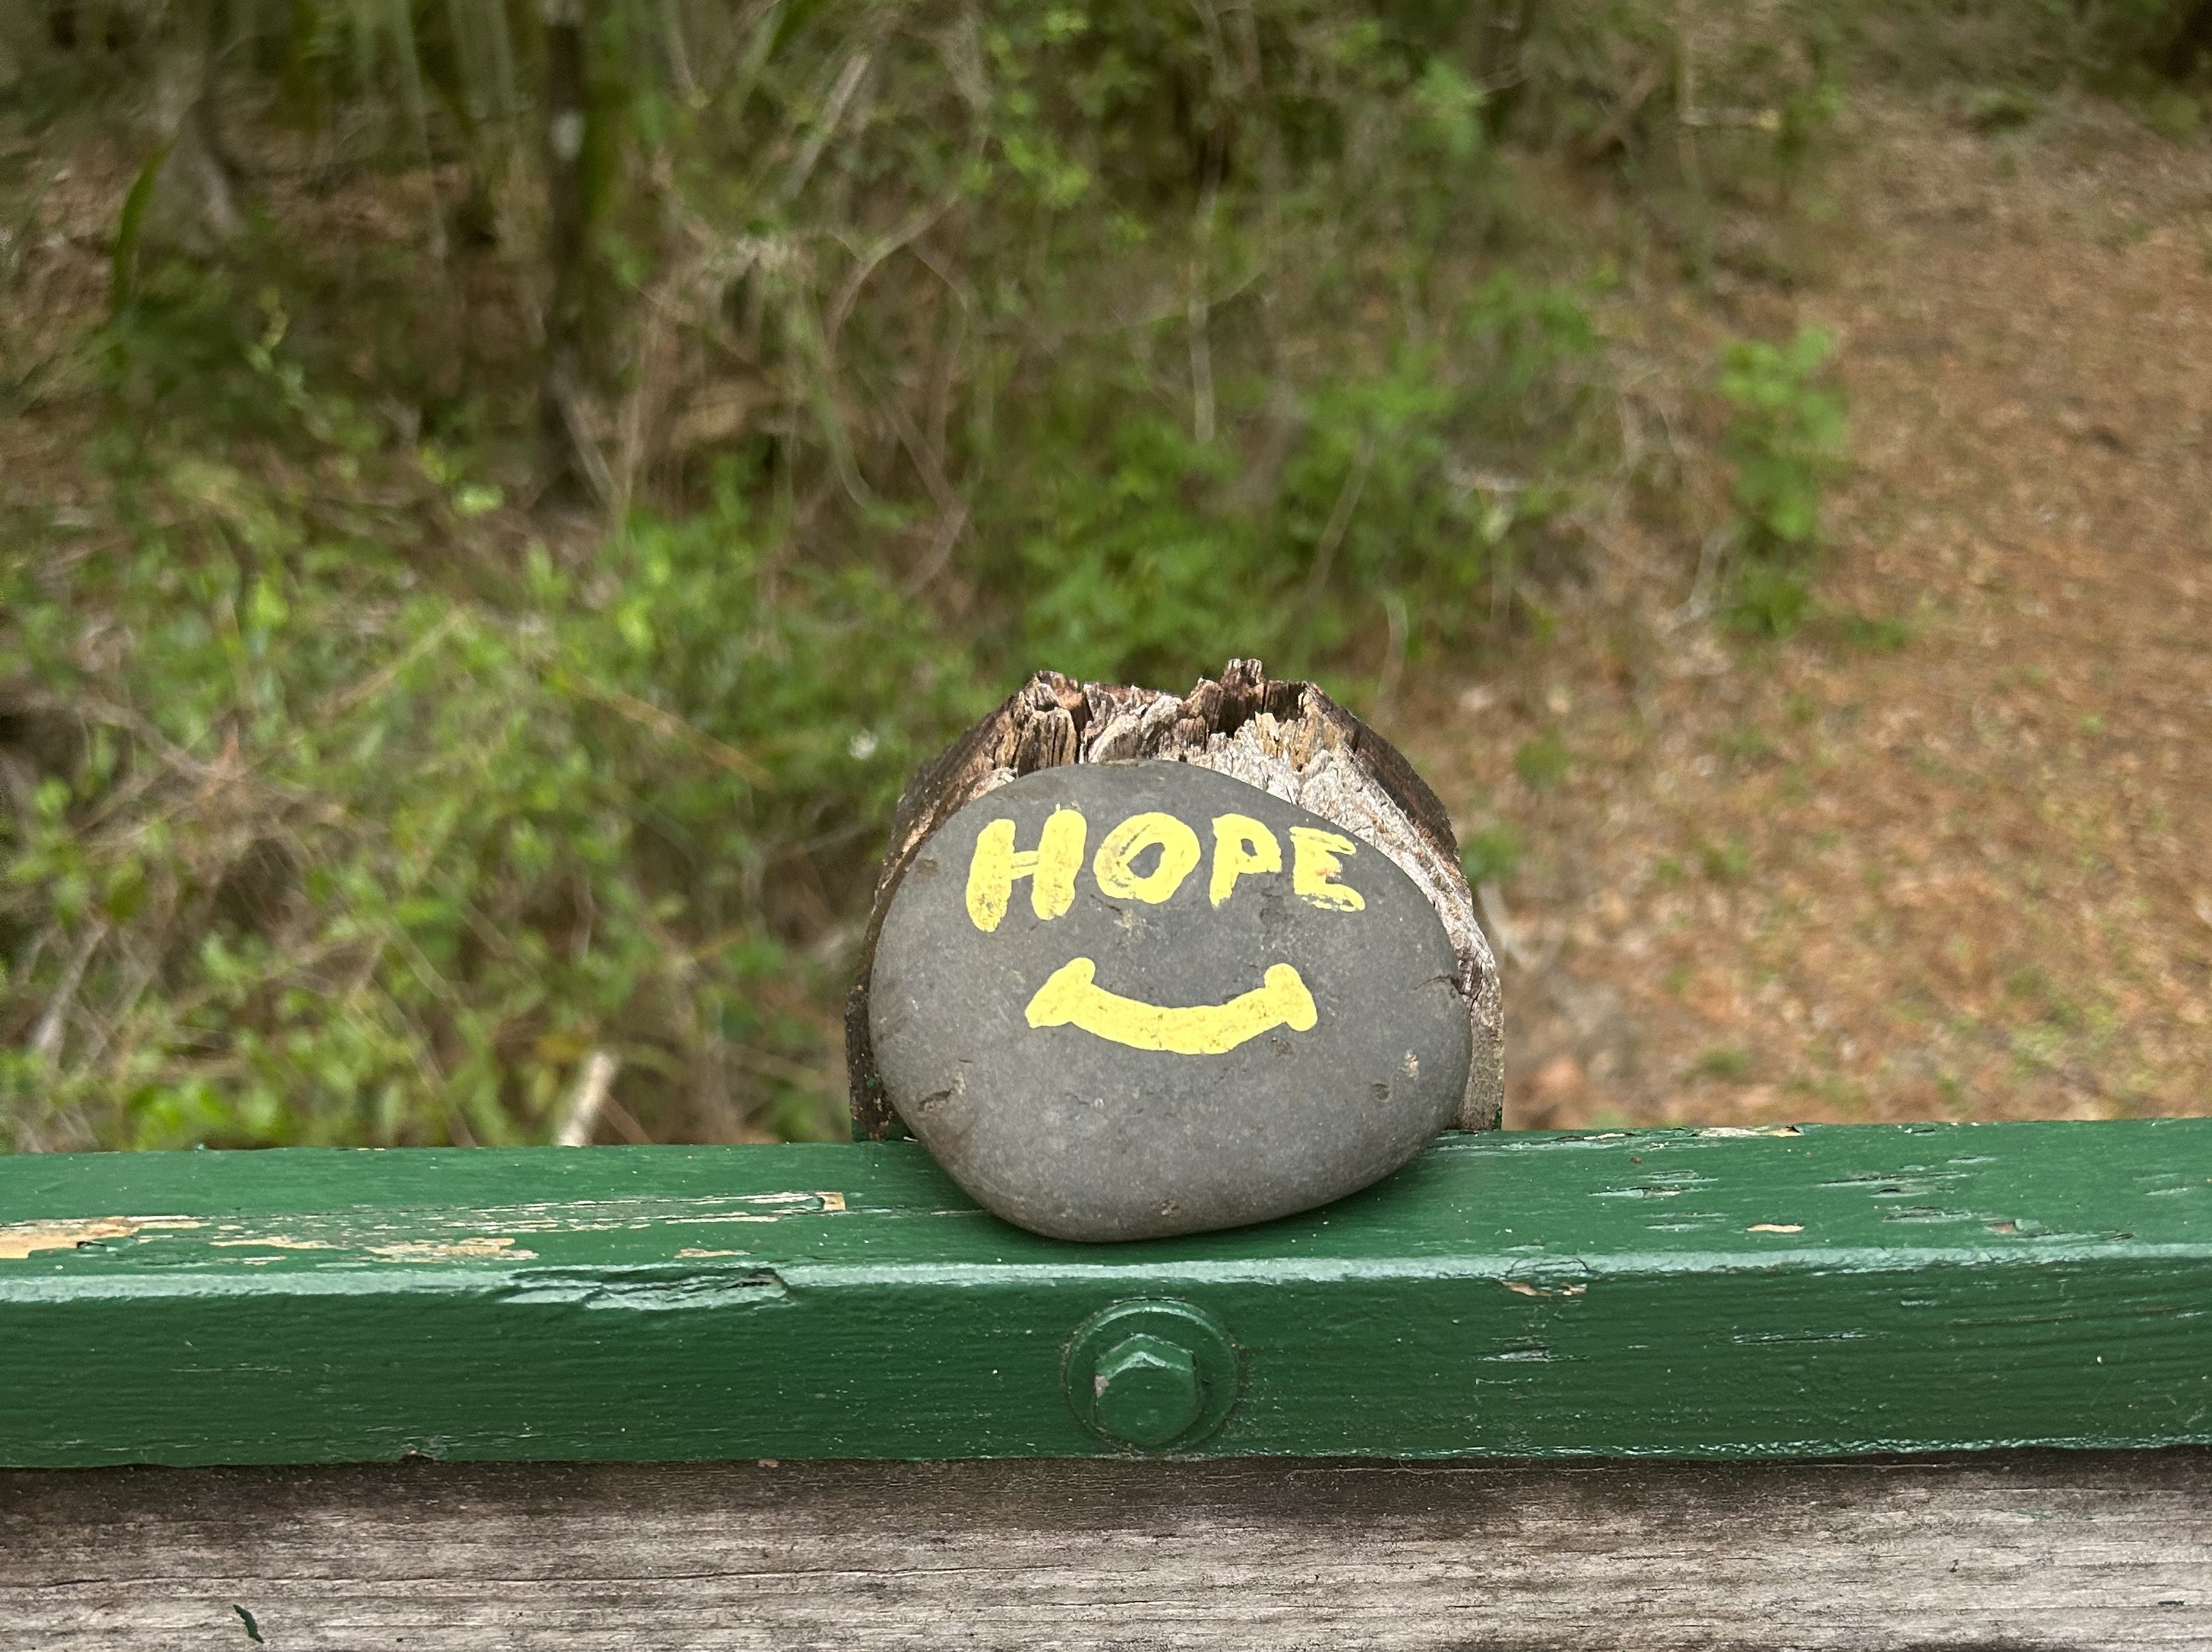 Camp Hope Image - Hope and Smile